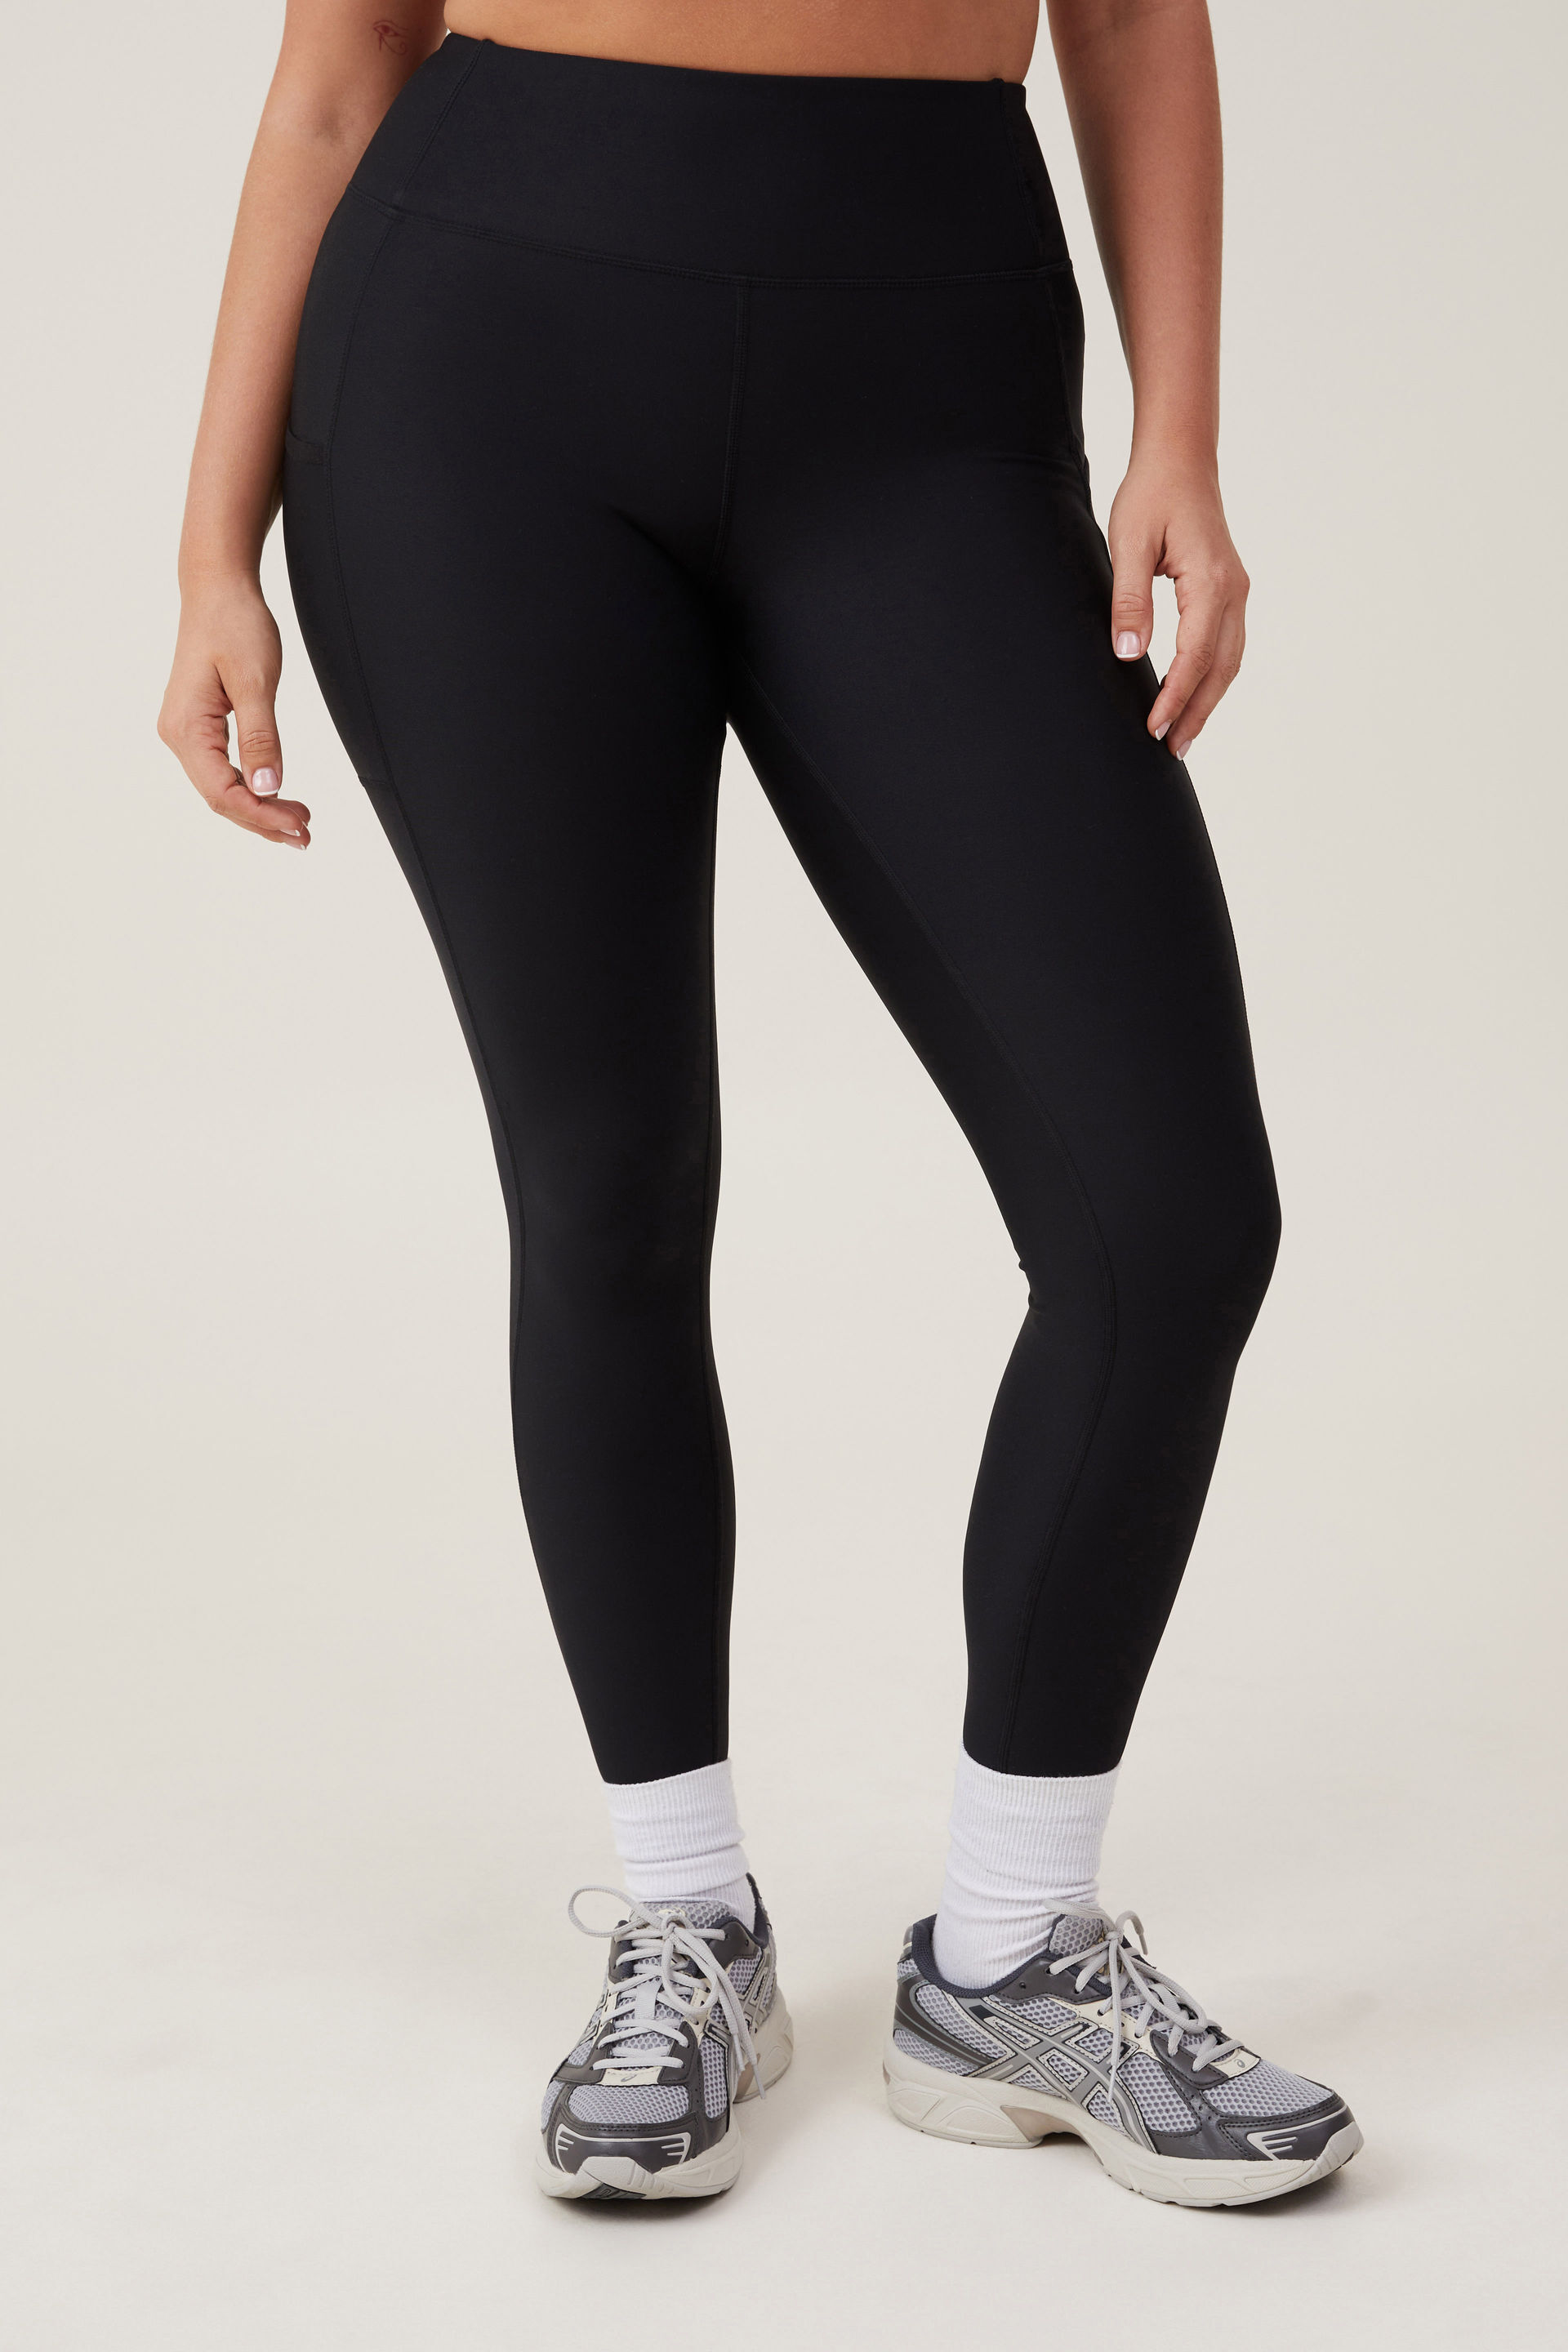 Amazon.com: ZUTY Fleece Lined Leggings Women Winter Thermal Insulated  Leggings with Pockets High Waisted Warm Yoga Pants Plus Size-Black-S :  Sports & Outdoors